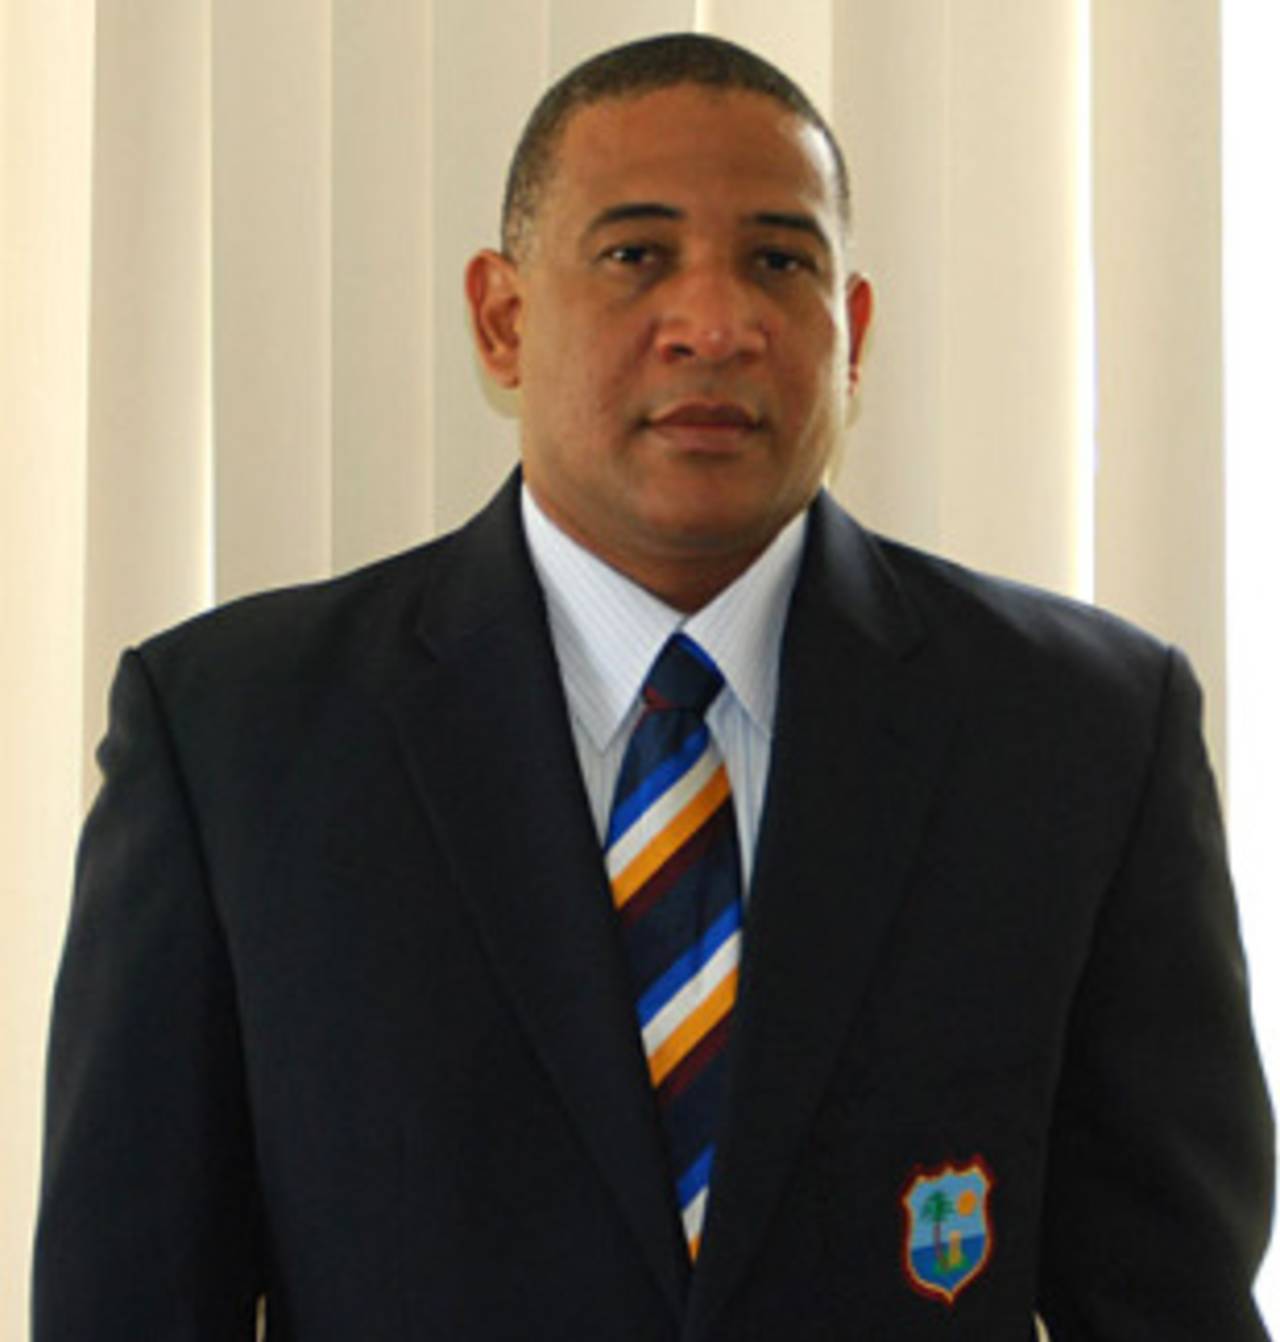 Ernest Hilaire, WICB chief executive, profile pic